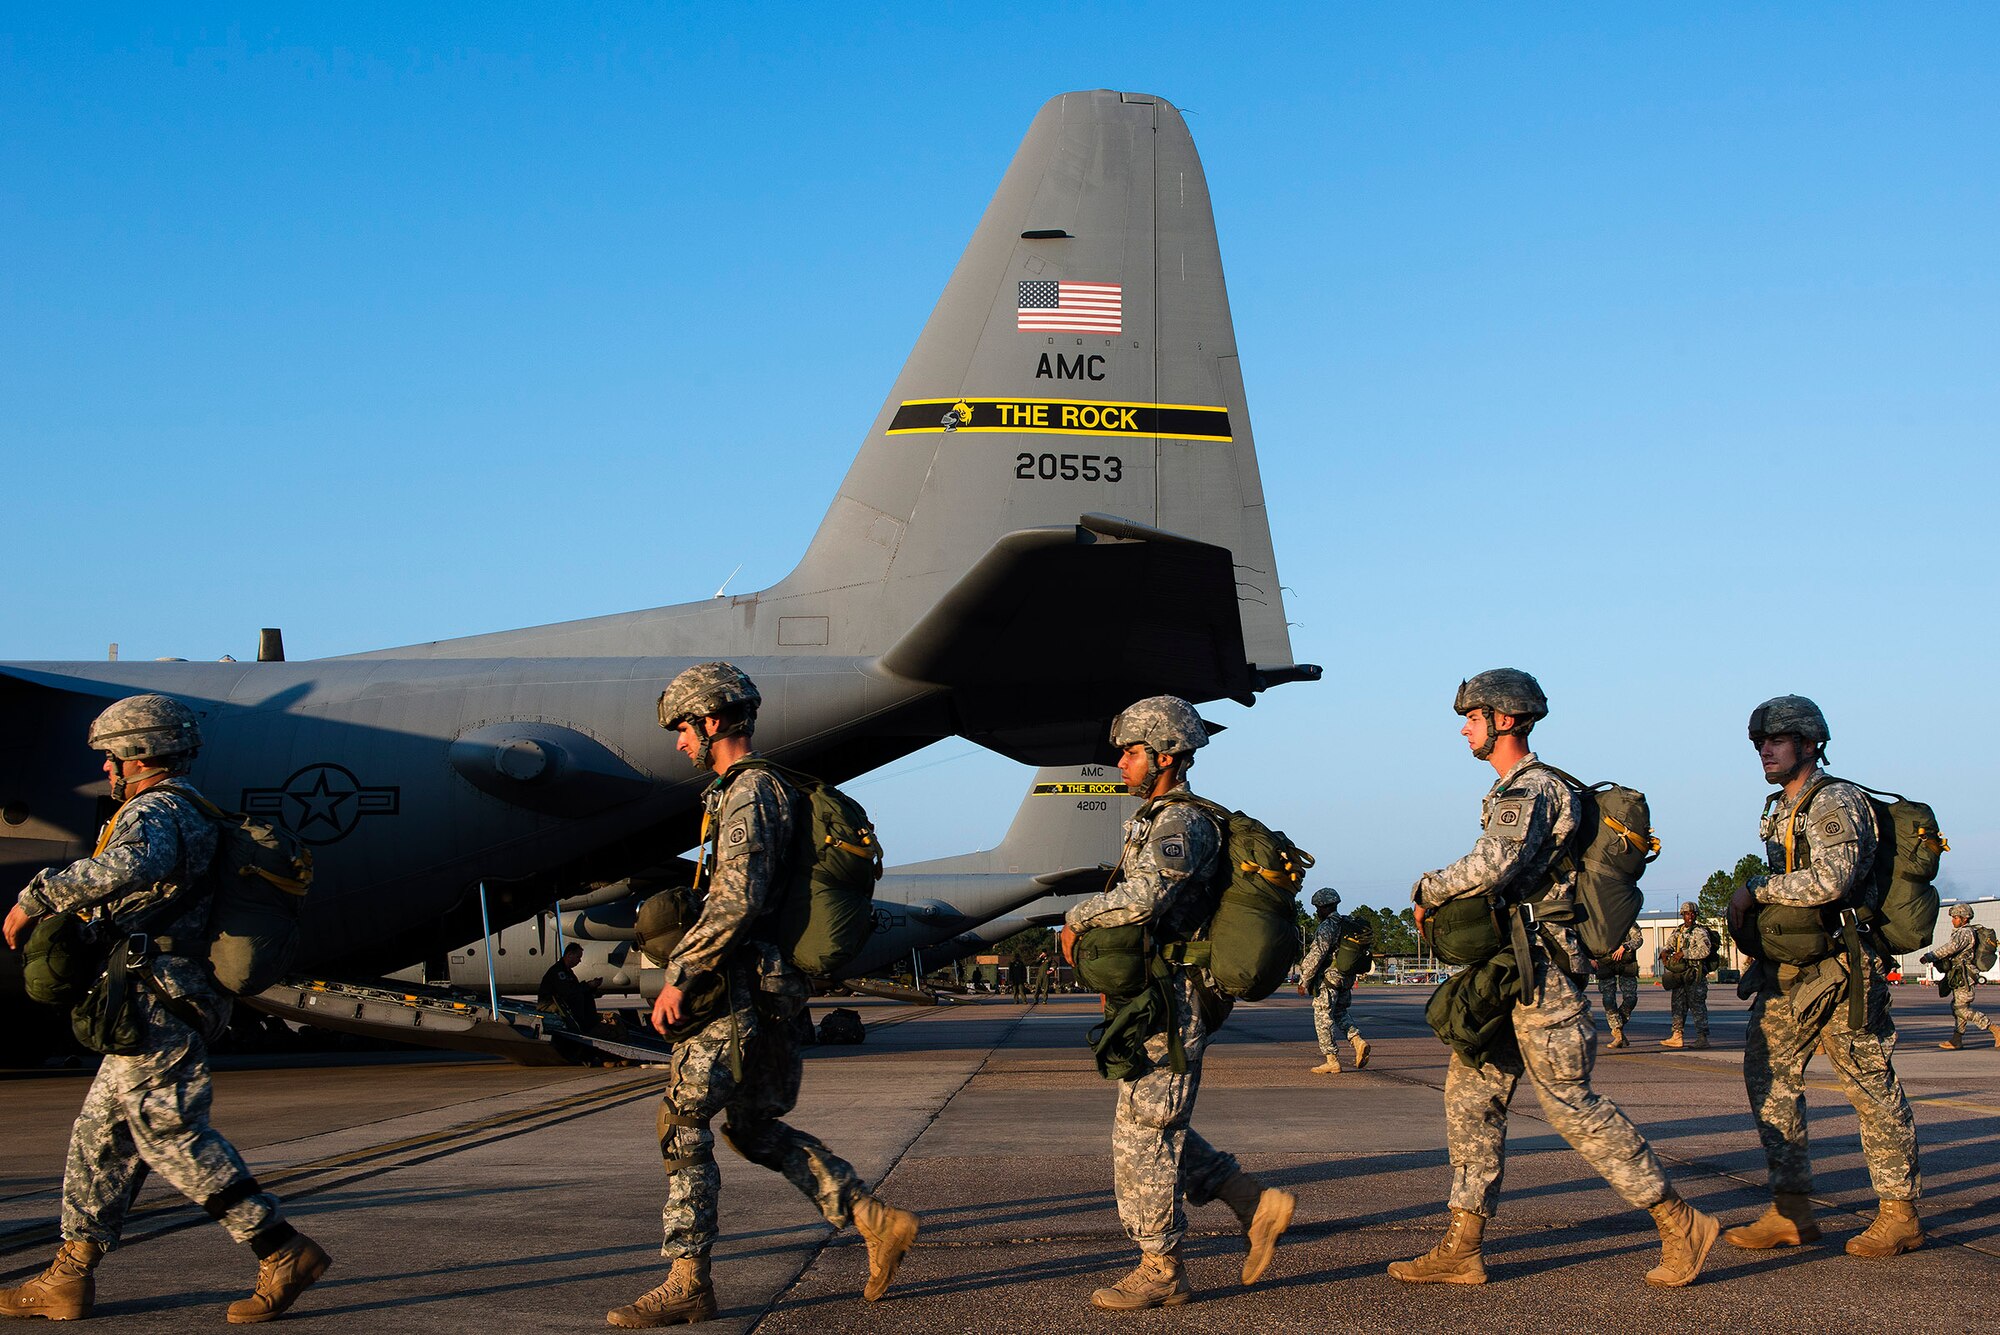 U.S. Army paratroopers from the 82nd Airborne Division step to a C-130H Aug. 18, 2013, at Alexandria International Airport, La. The paratroopers were conducting a static line drop that marked the beginning of Joint Operational Access Exercise 13-0X. (U.S. Air Force photo by Staff Sgt. Russ Scalf)